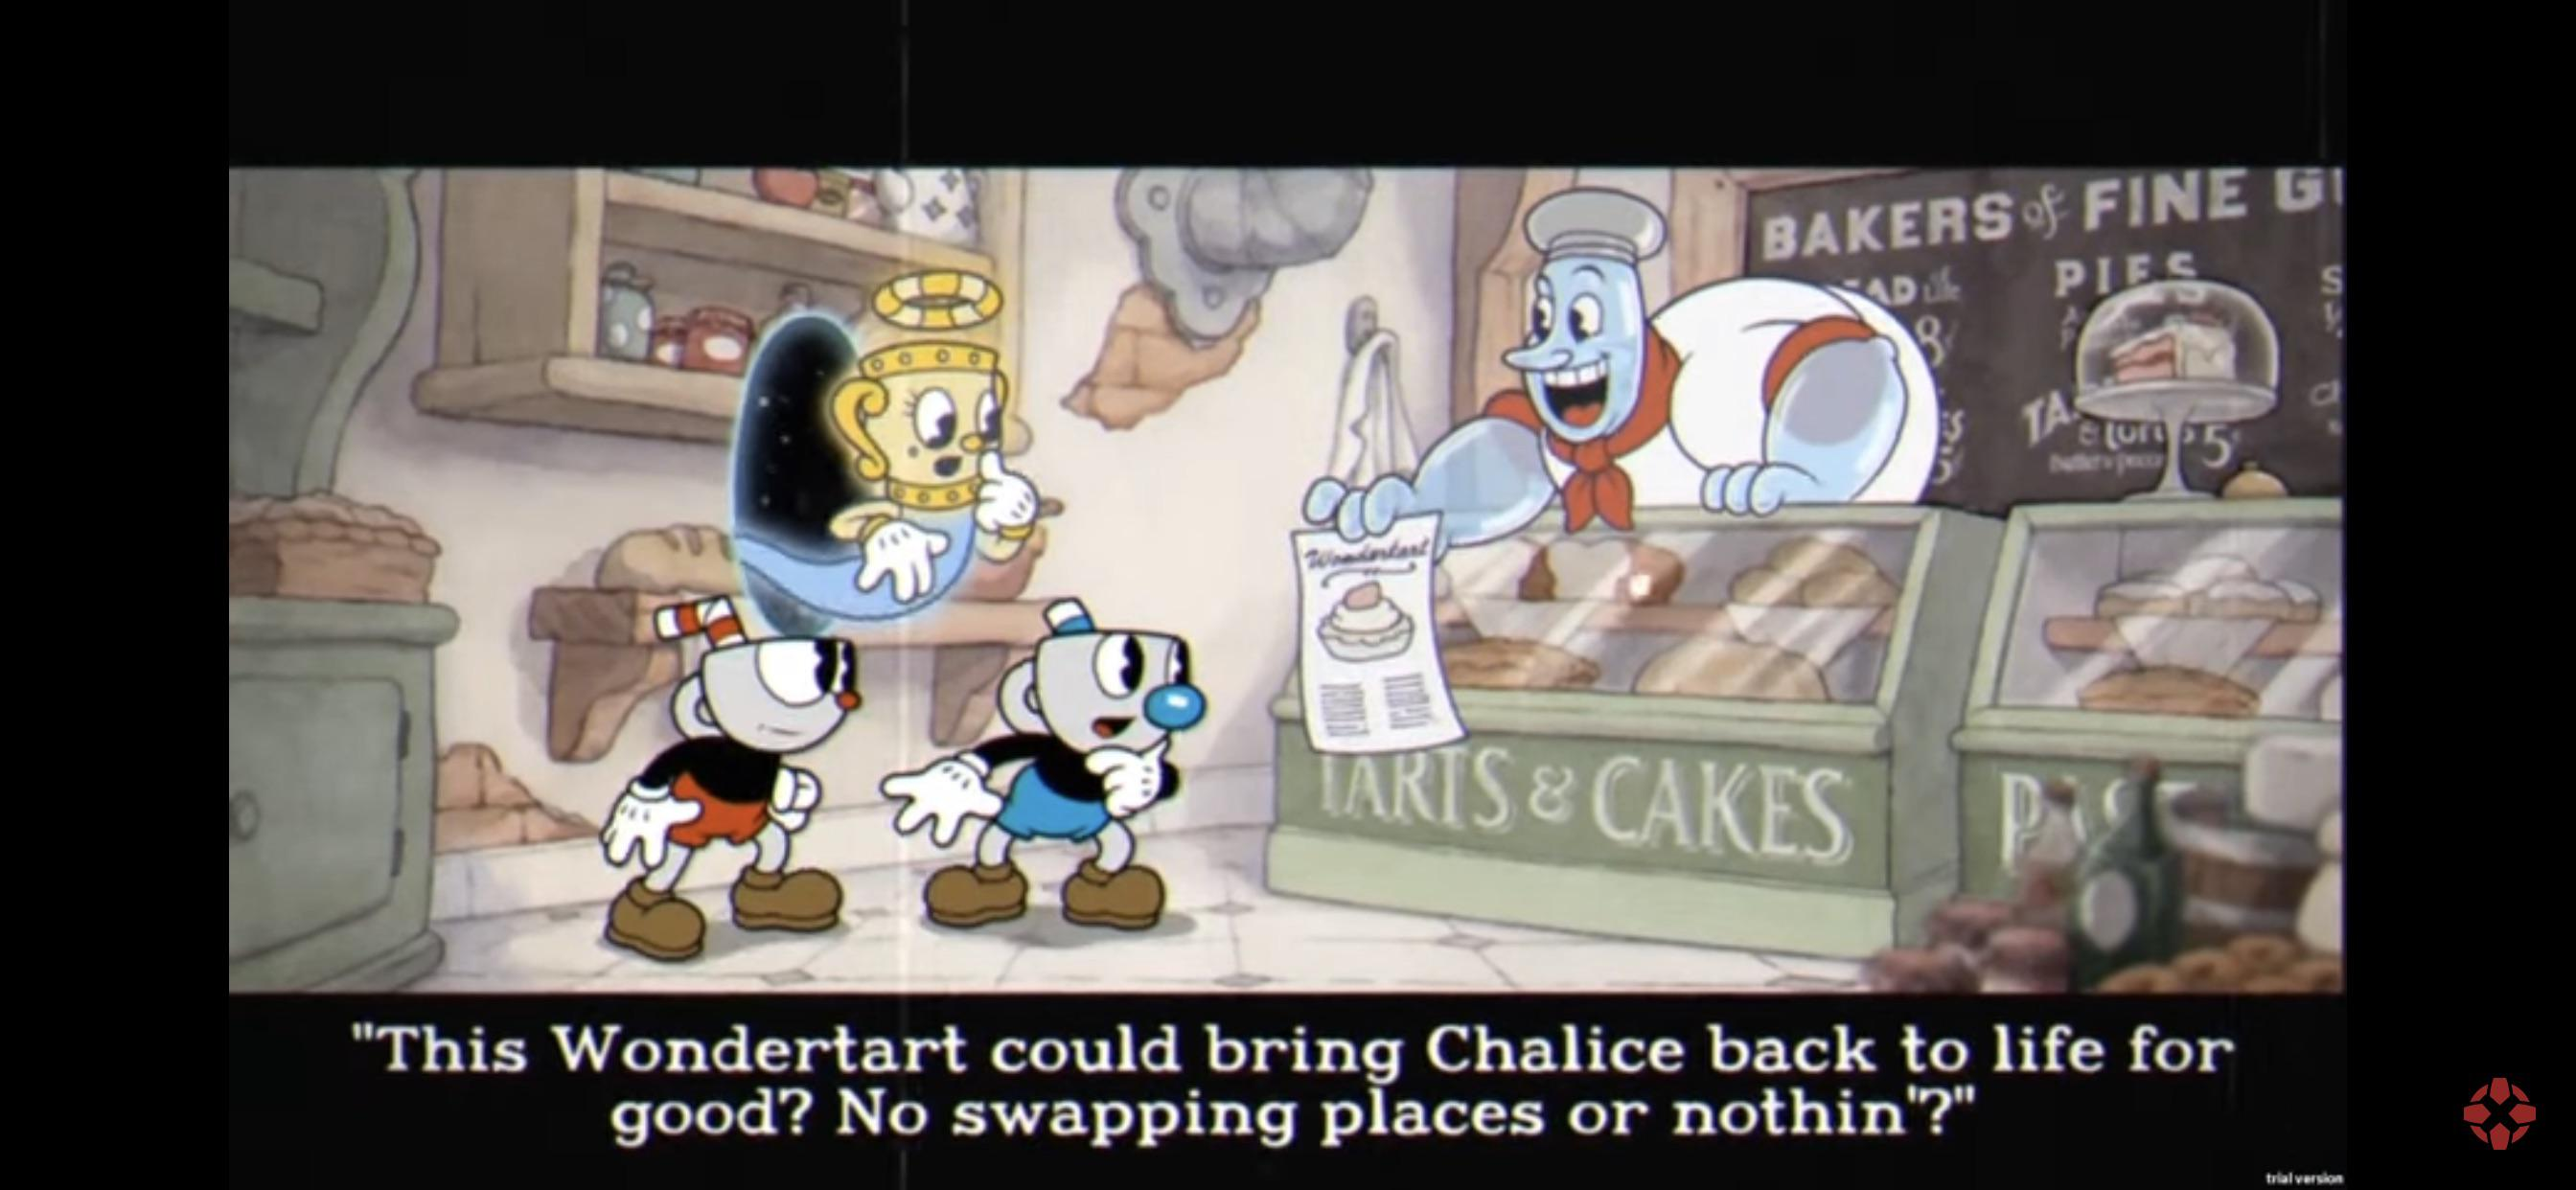 Screenshot from the game. Chef Saltbaker shows off the Wondertart recipe.